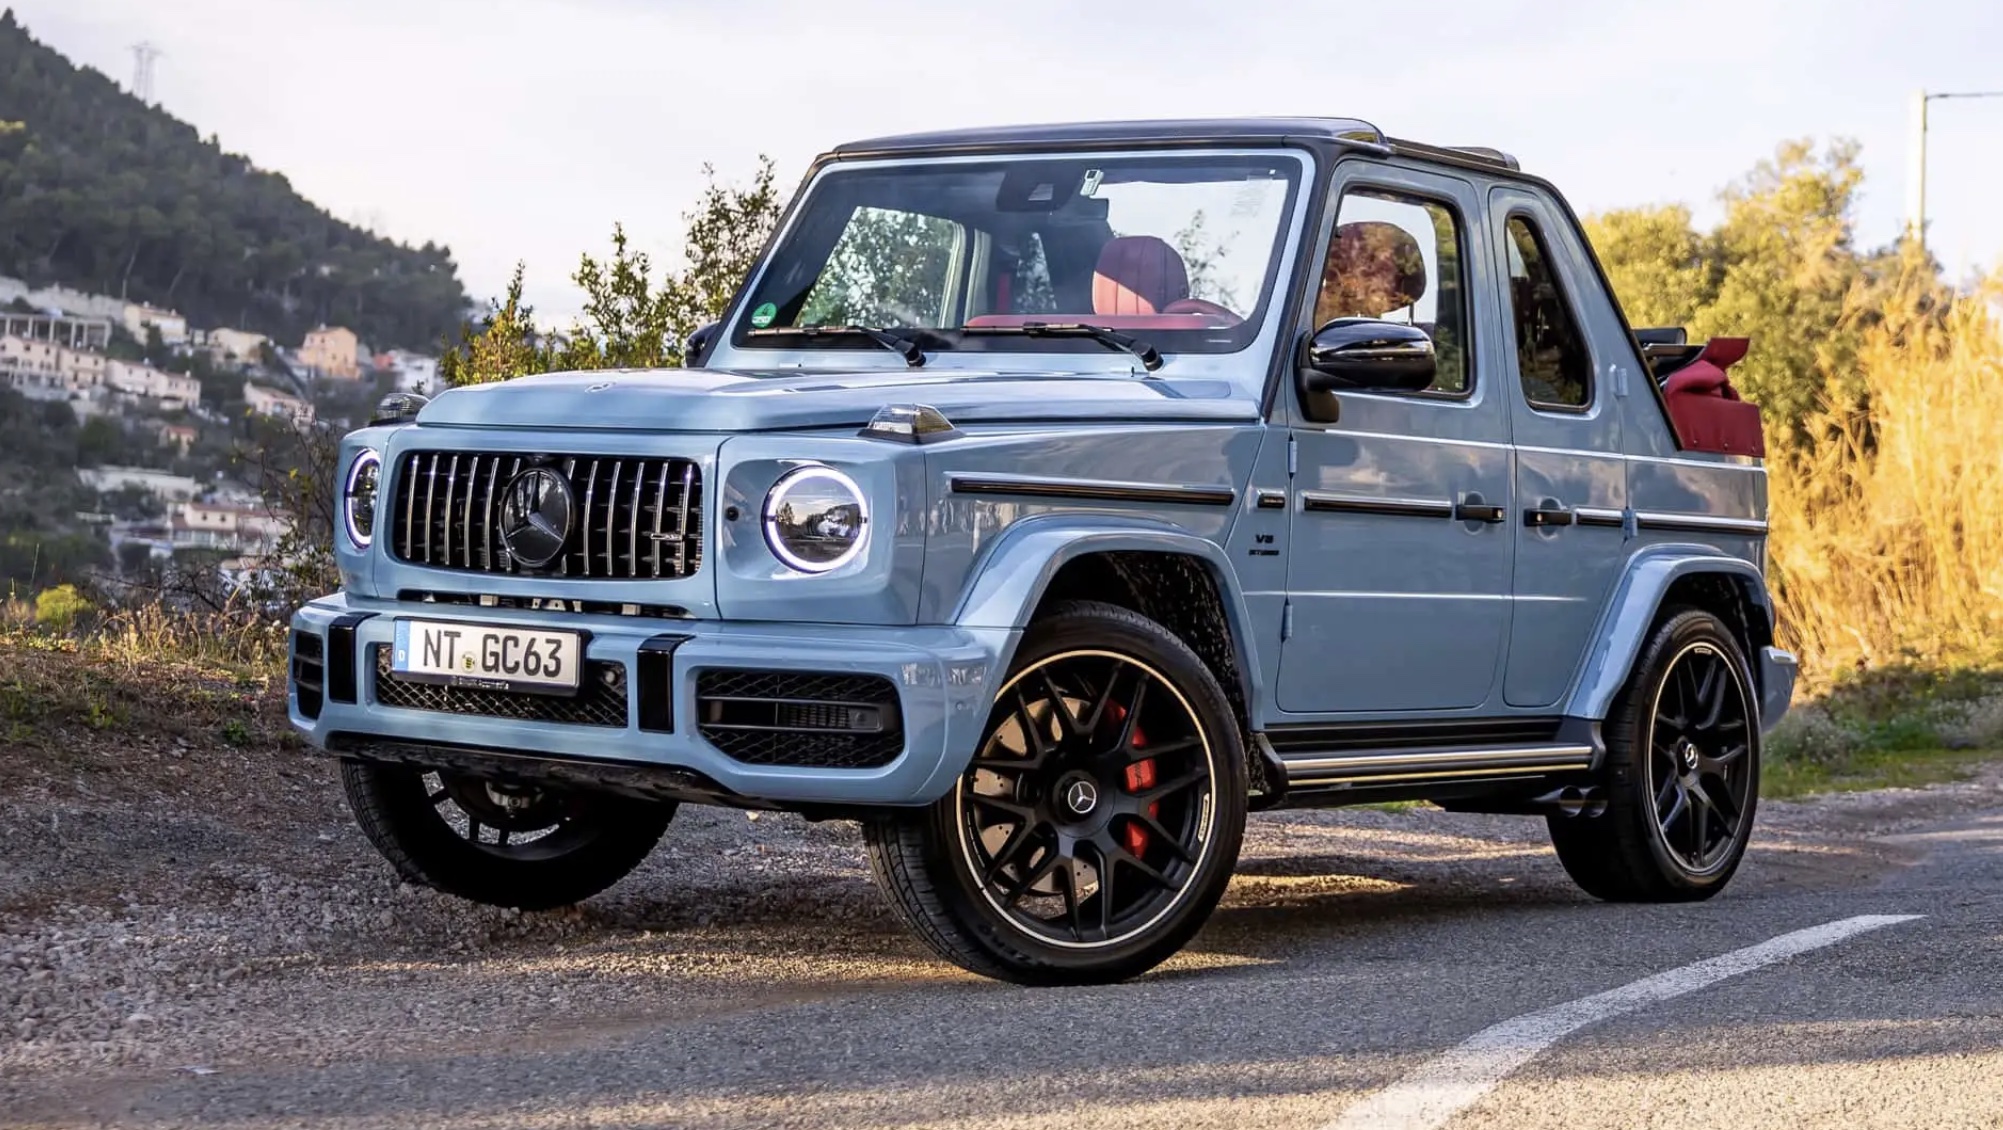 the-13-million-mercedes-benz-g-class-is-convertible-and-has-suicide-doors-226838_1.jpg